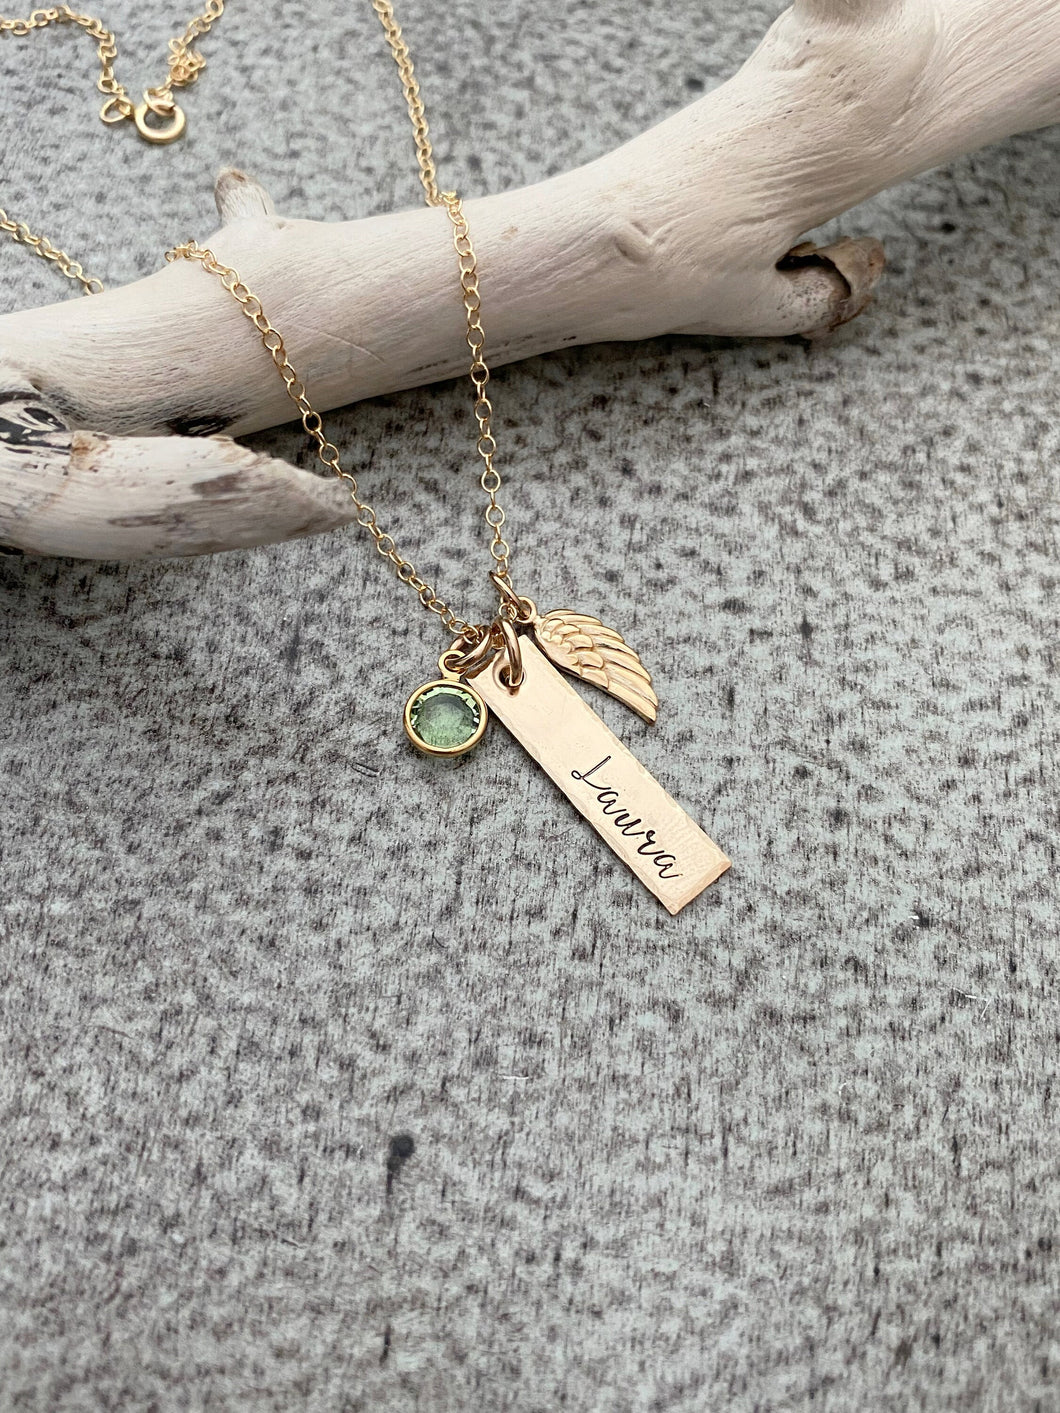 Gold tone necklace with birthstone crystal, bar with name and angel wing charm